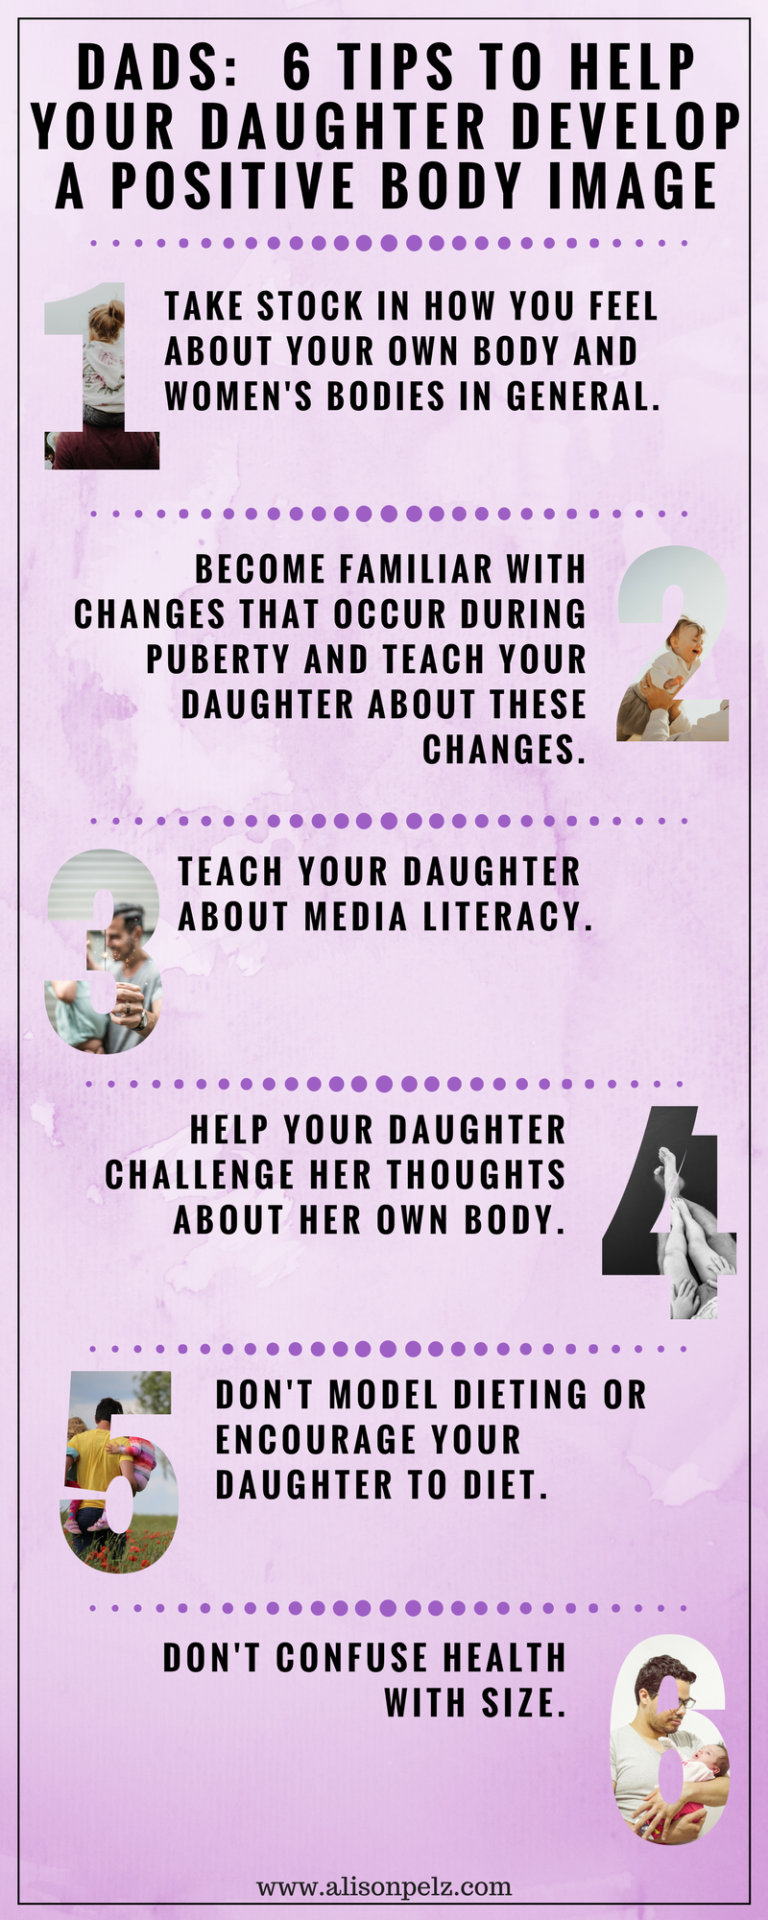 Dads 6 Tips To Help Your Daughter Develop A Positive Body Image · Alison Pelz Ld Rdn Cde Lcsw